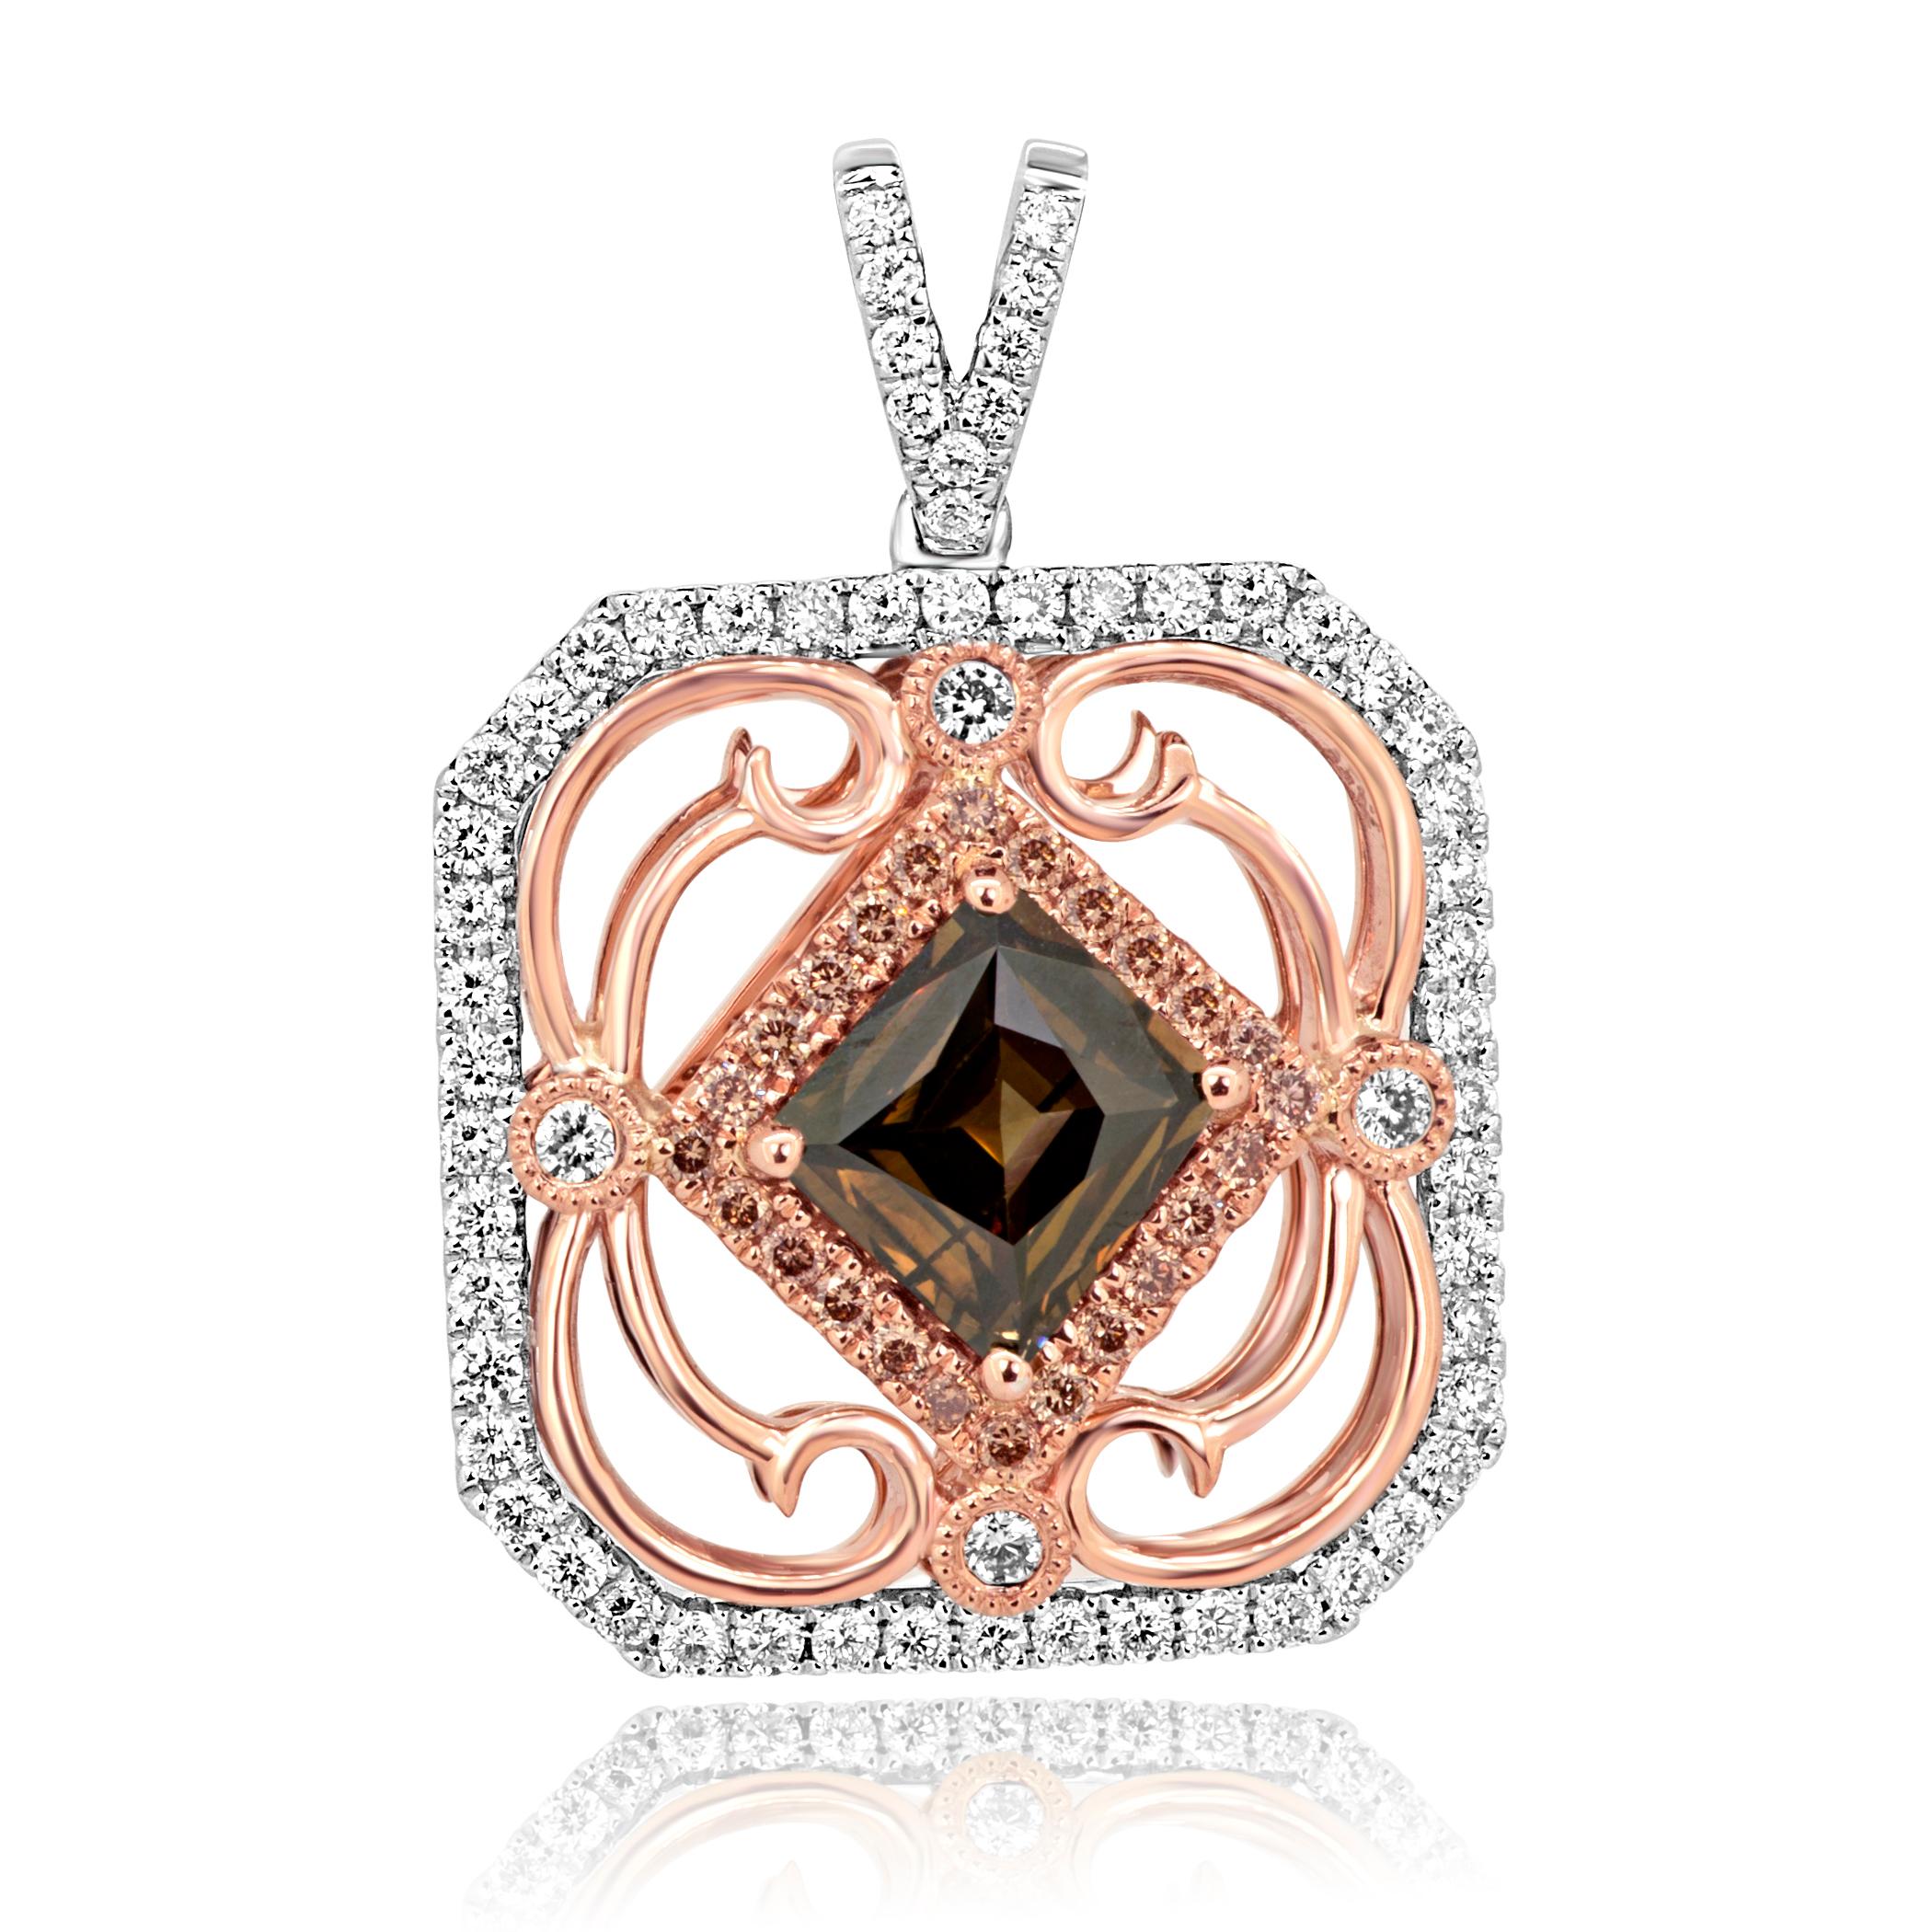 Stunning Cognac Diamond Kite Shape SI Clarity 1.32 Carat Encircled in in Double Halo of Natural Cognac Diamond Round 0.22 Carat and White G-H Color VS-SI Diamond Round 0.58 Carat in Stunning 14K White and Rose Gold One Of a Kind Pendant Chain Drop